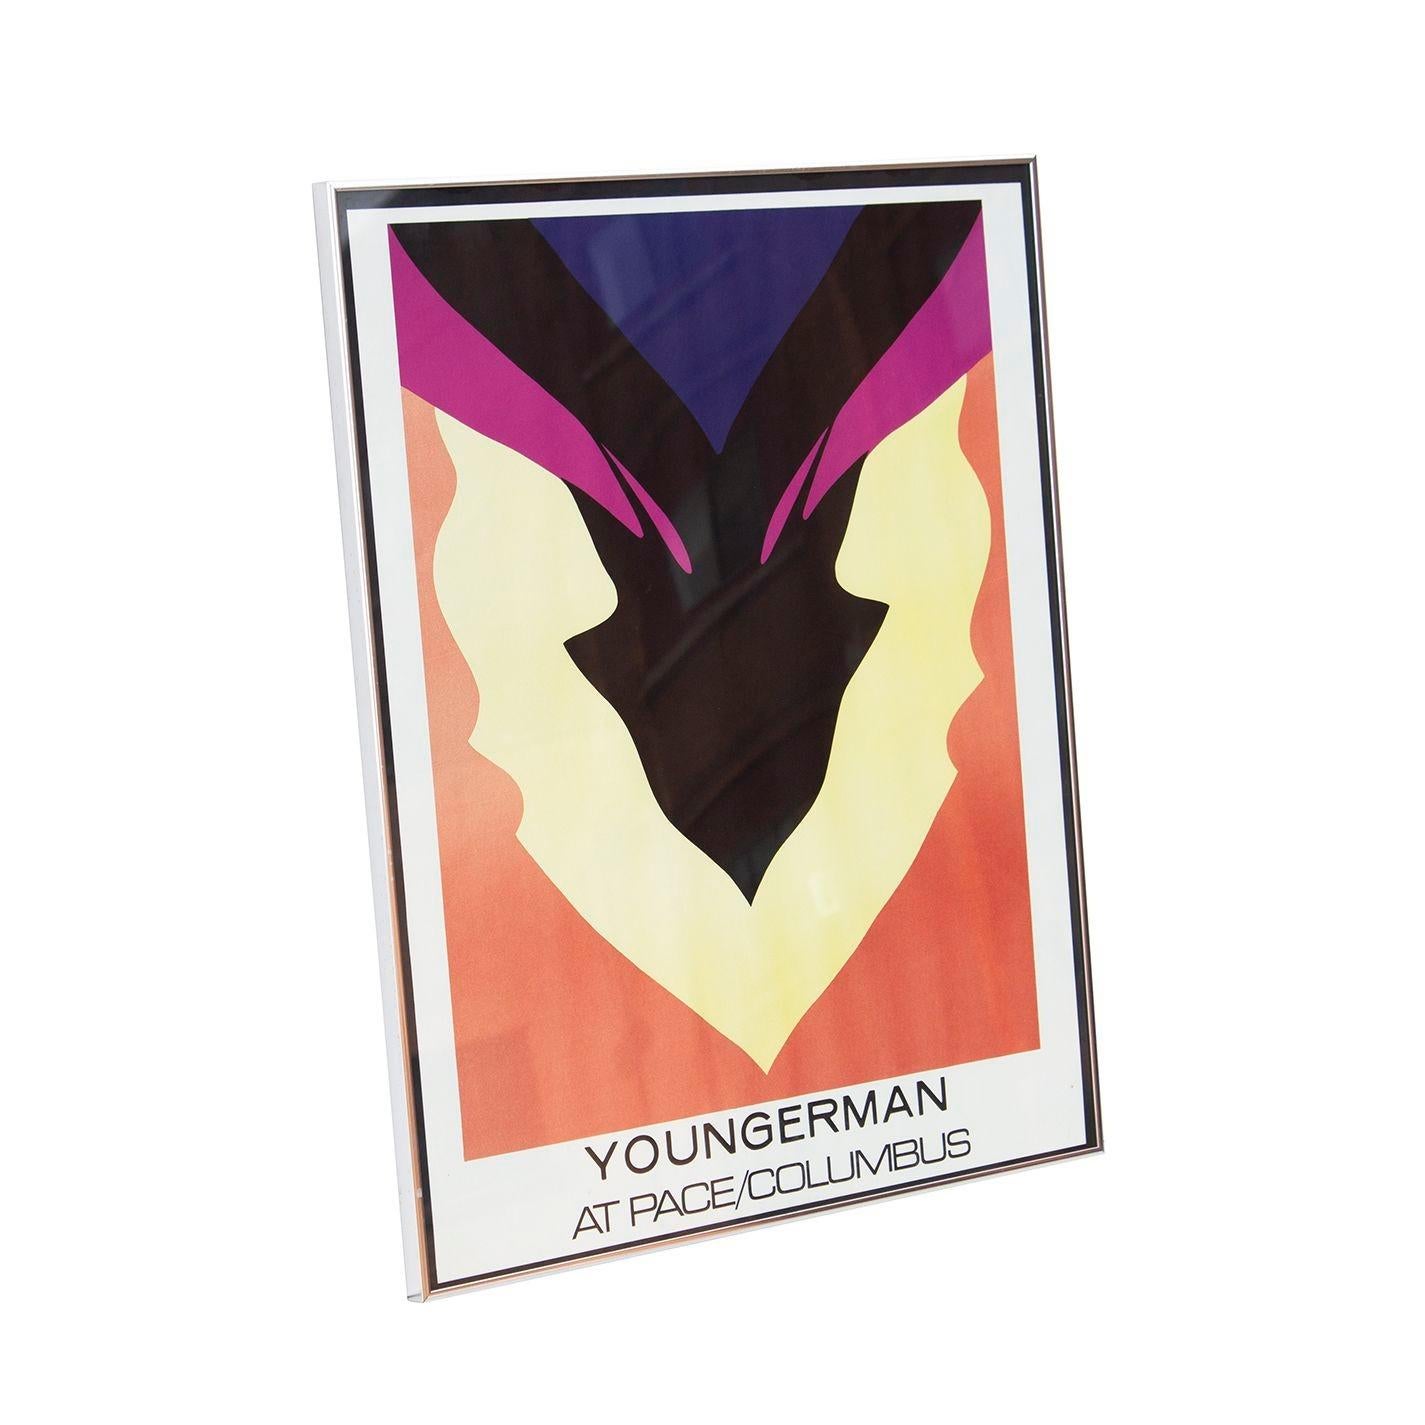 Framed poster - Youngerman at Pace / Columbus. Produced by Pace Posters for Youngerman's exhibition at Pace Gallery in Columbus, Ohio
A striking, high quality, original framed lithograph from American artist Jack Youngerman (1926-2020). This is a